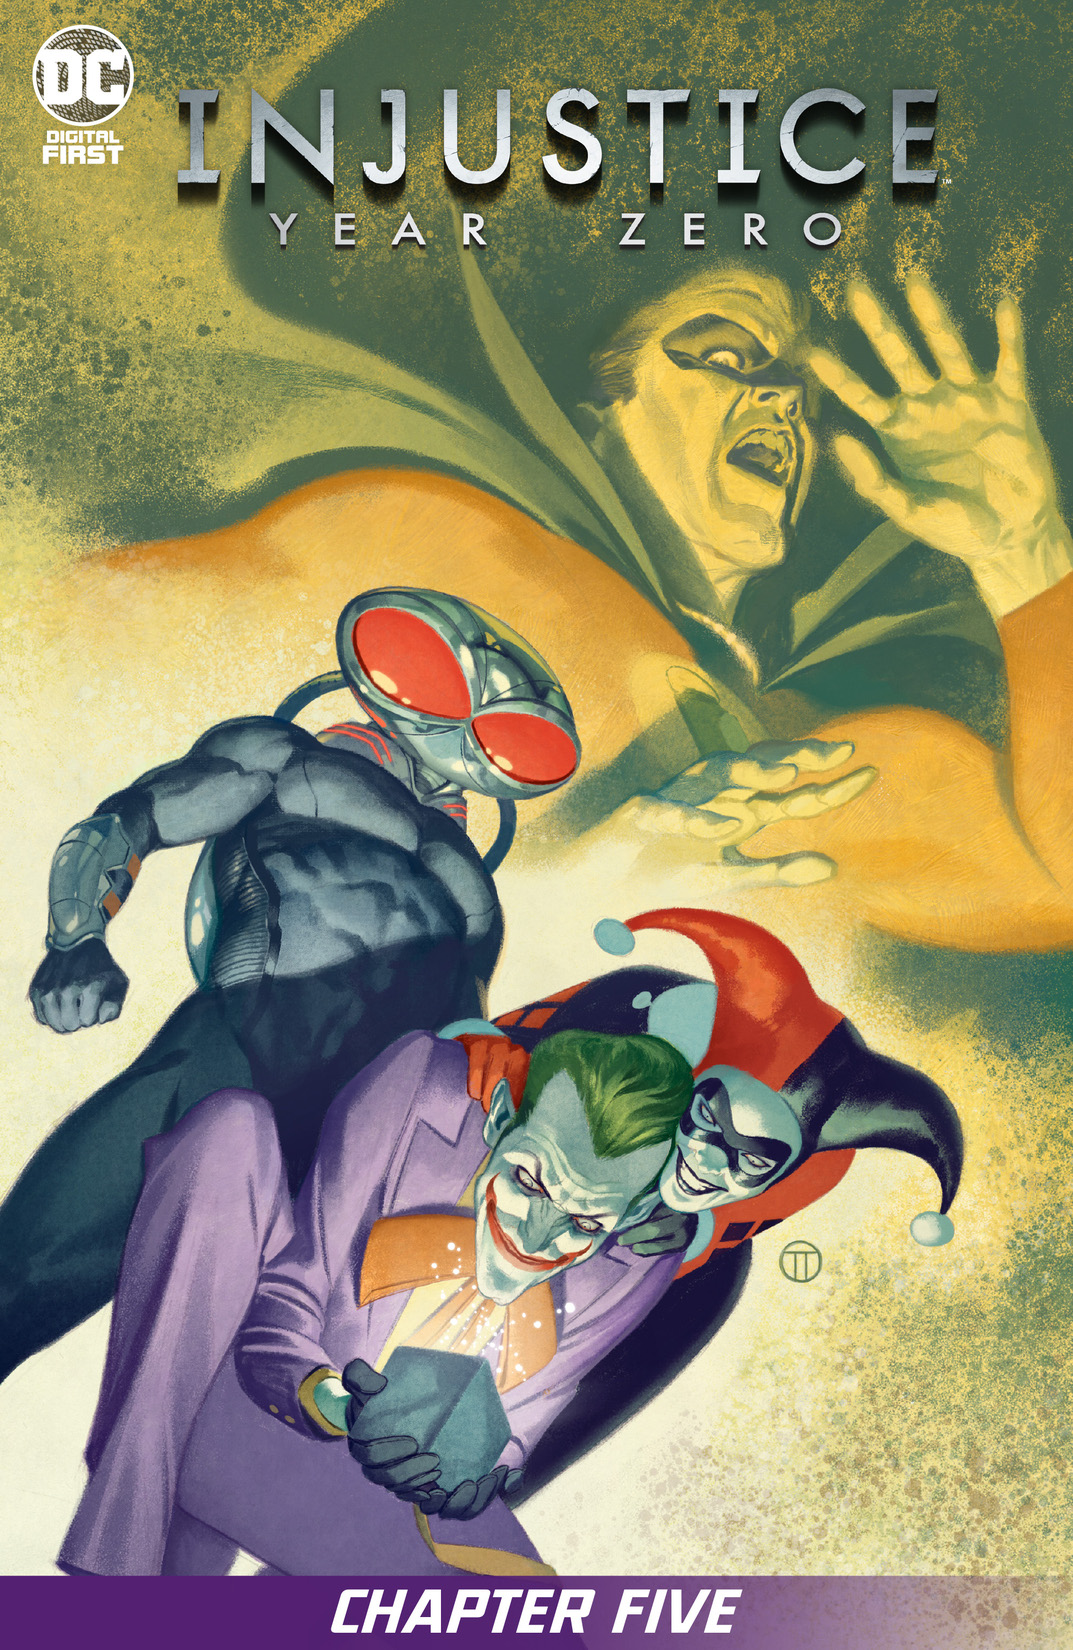 Injustice: Year Zero #5 preview images